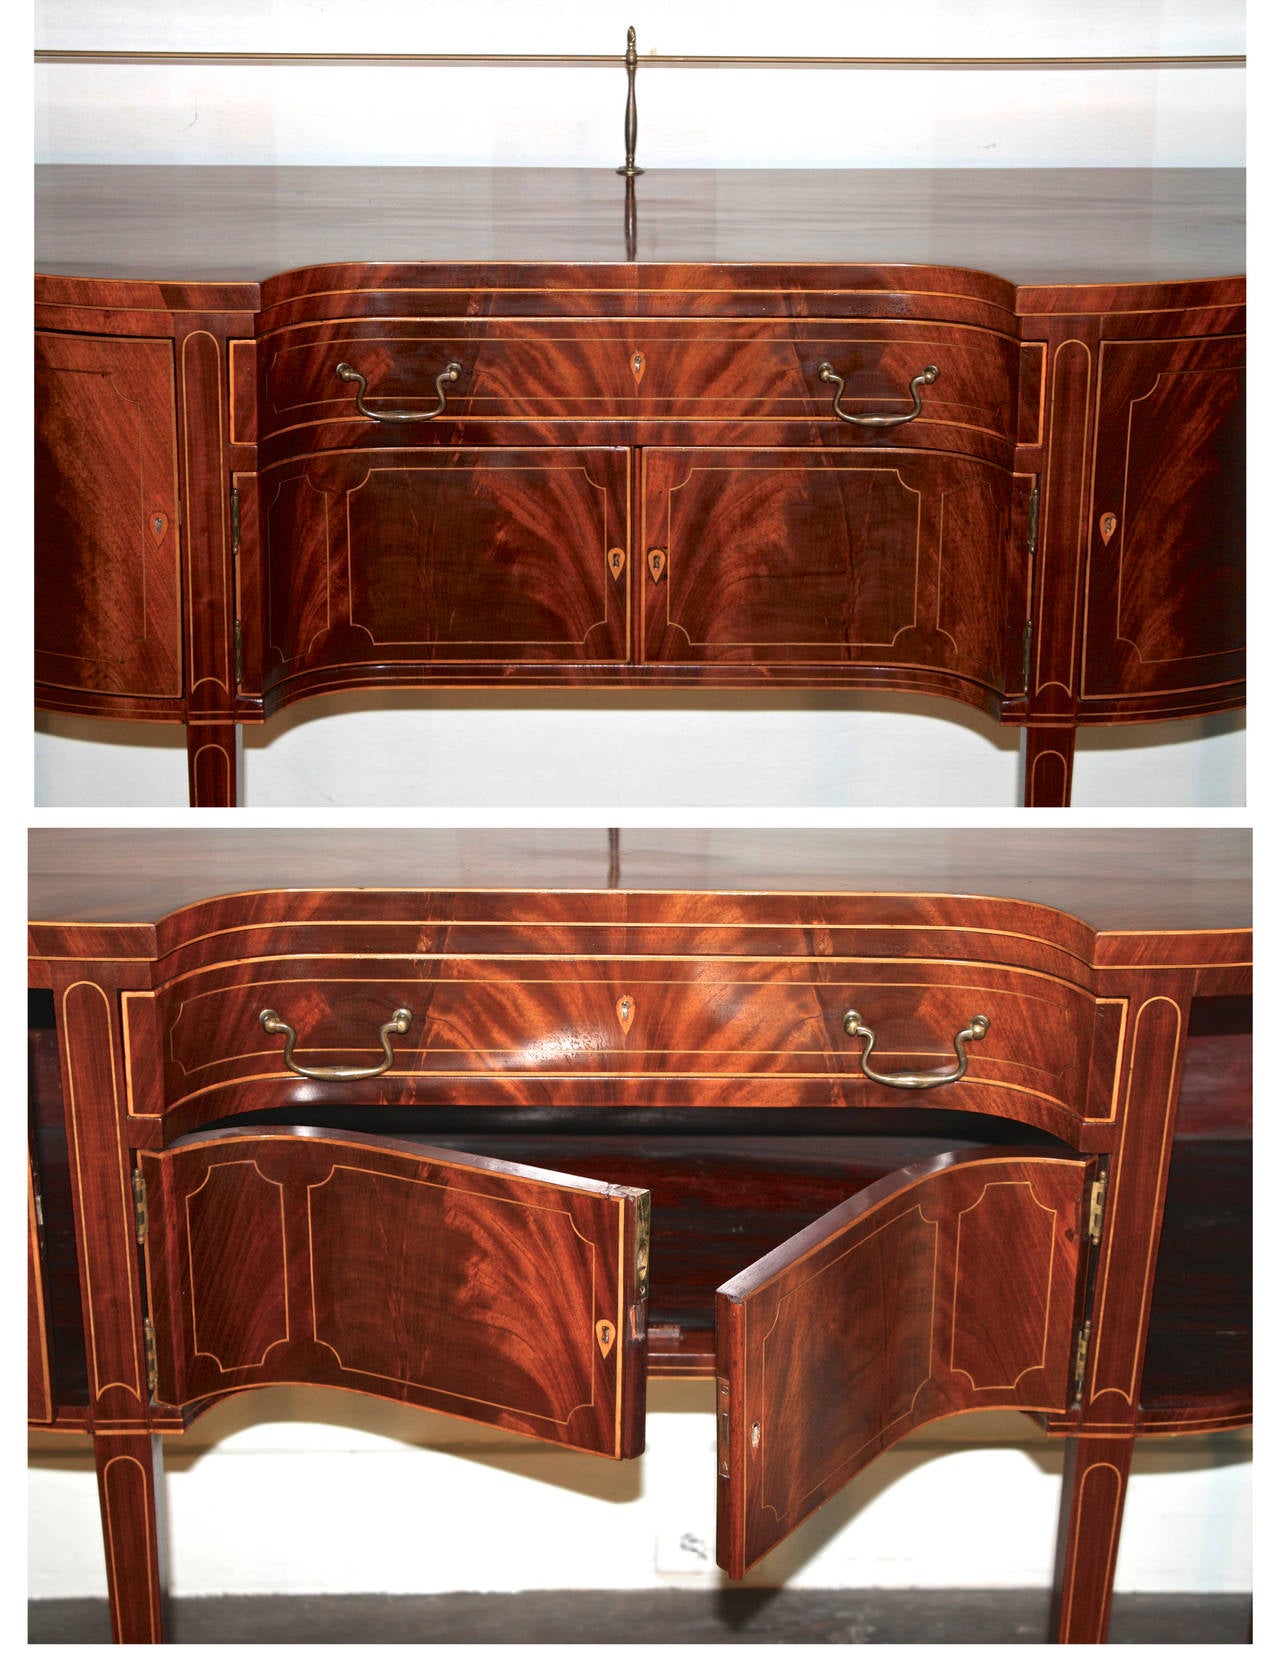 19th Century American Centennial Hepplewhite Sideboard For Sale